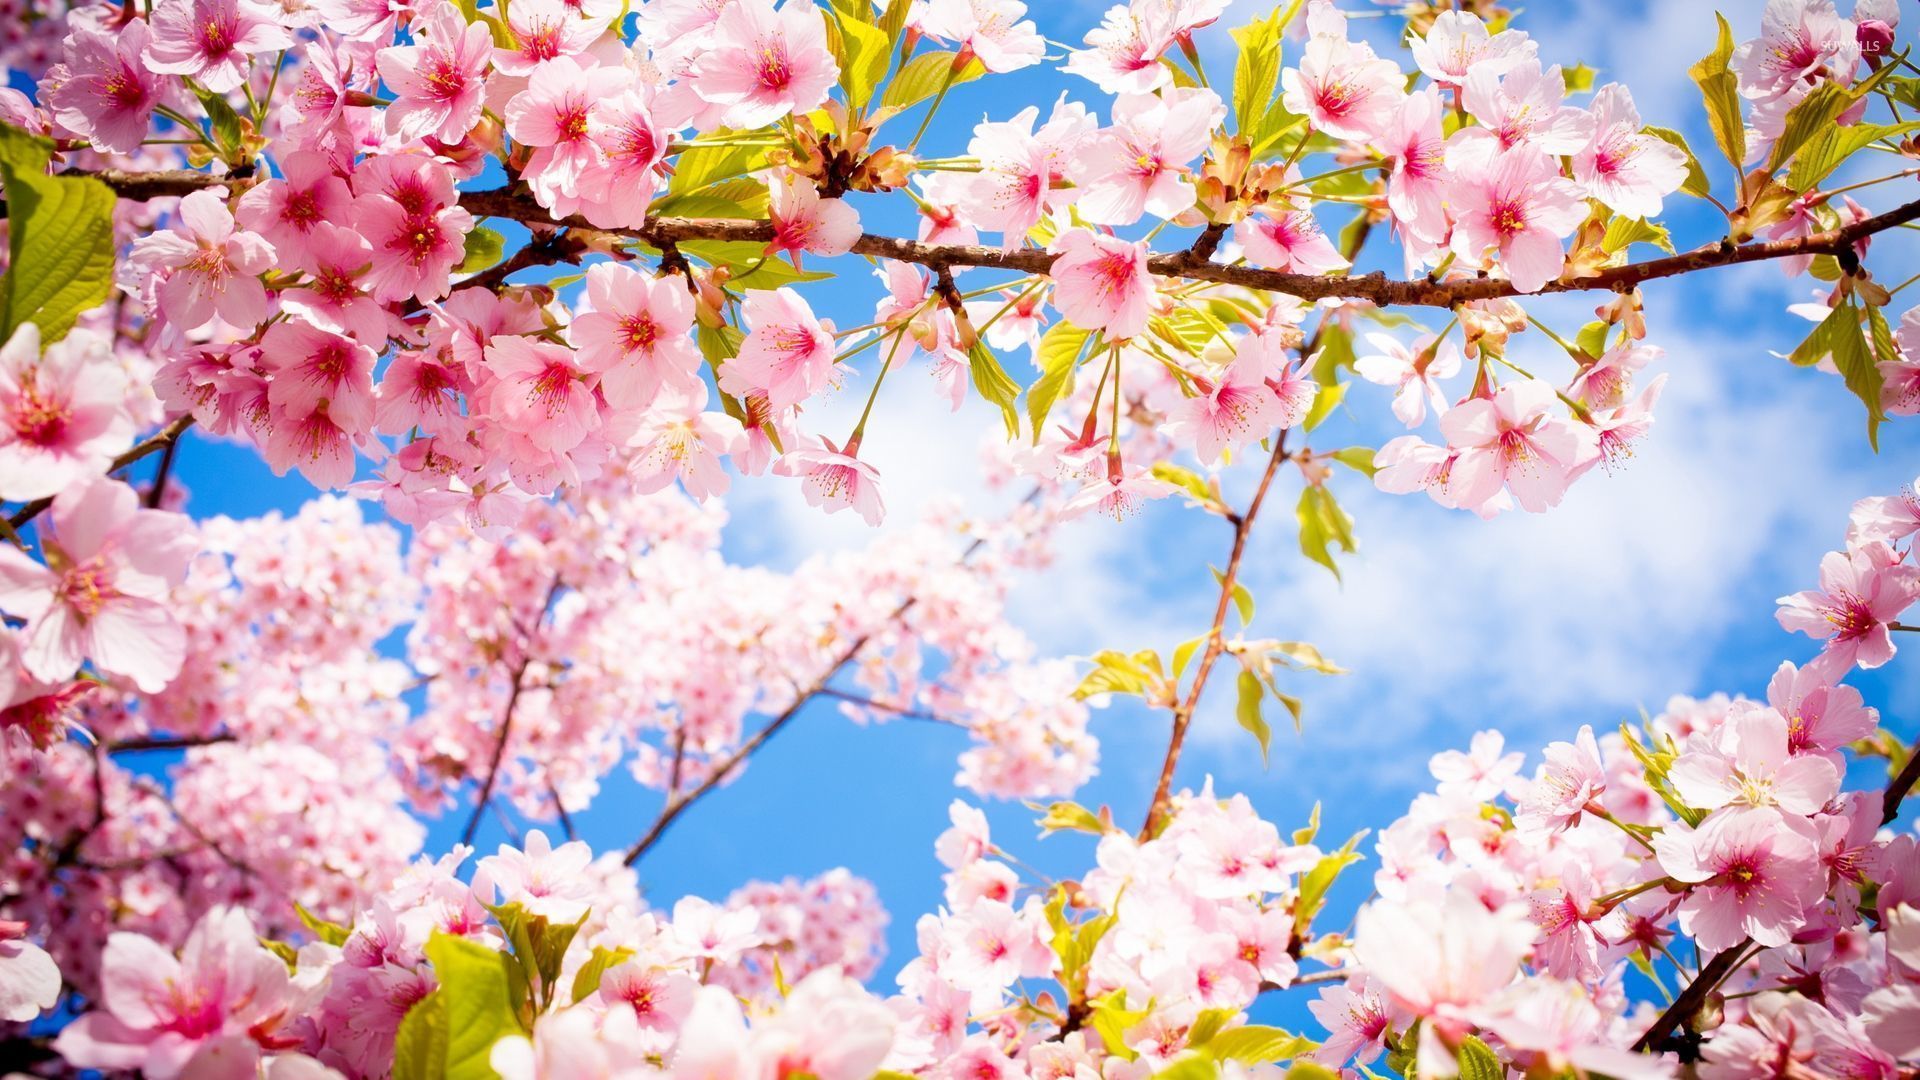 Pink blossoms in the spring wallpaper wallpaper